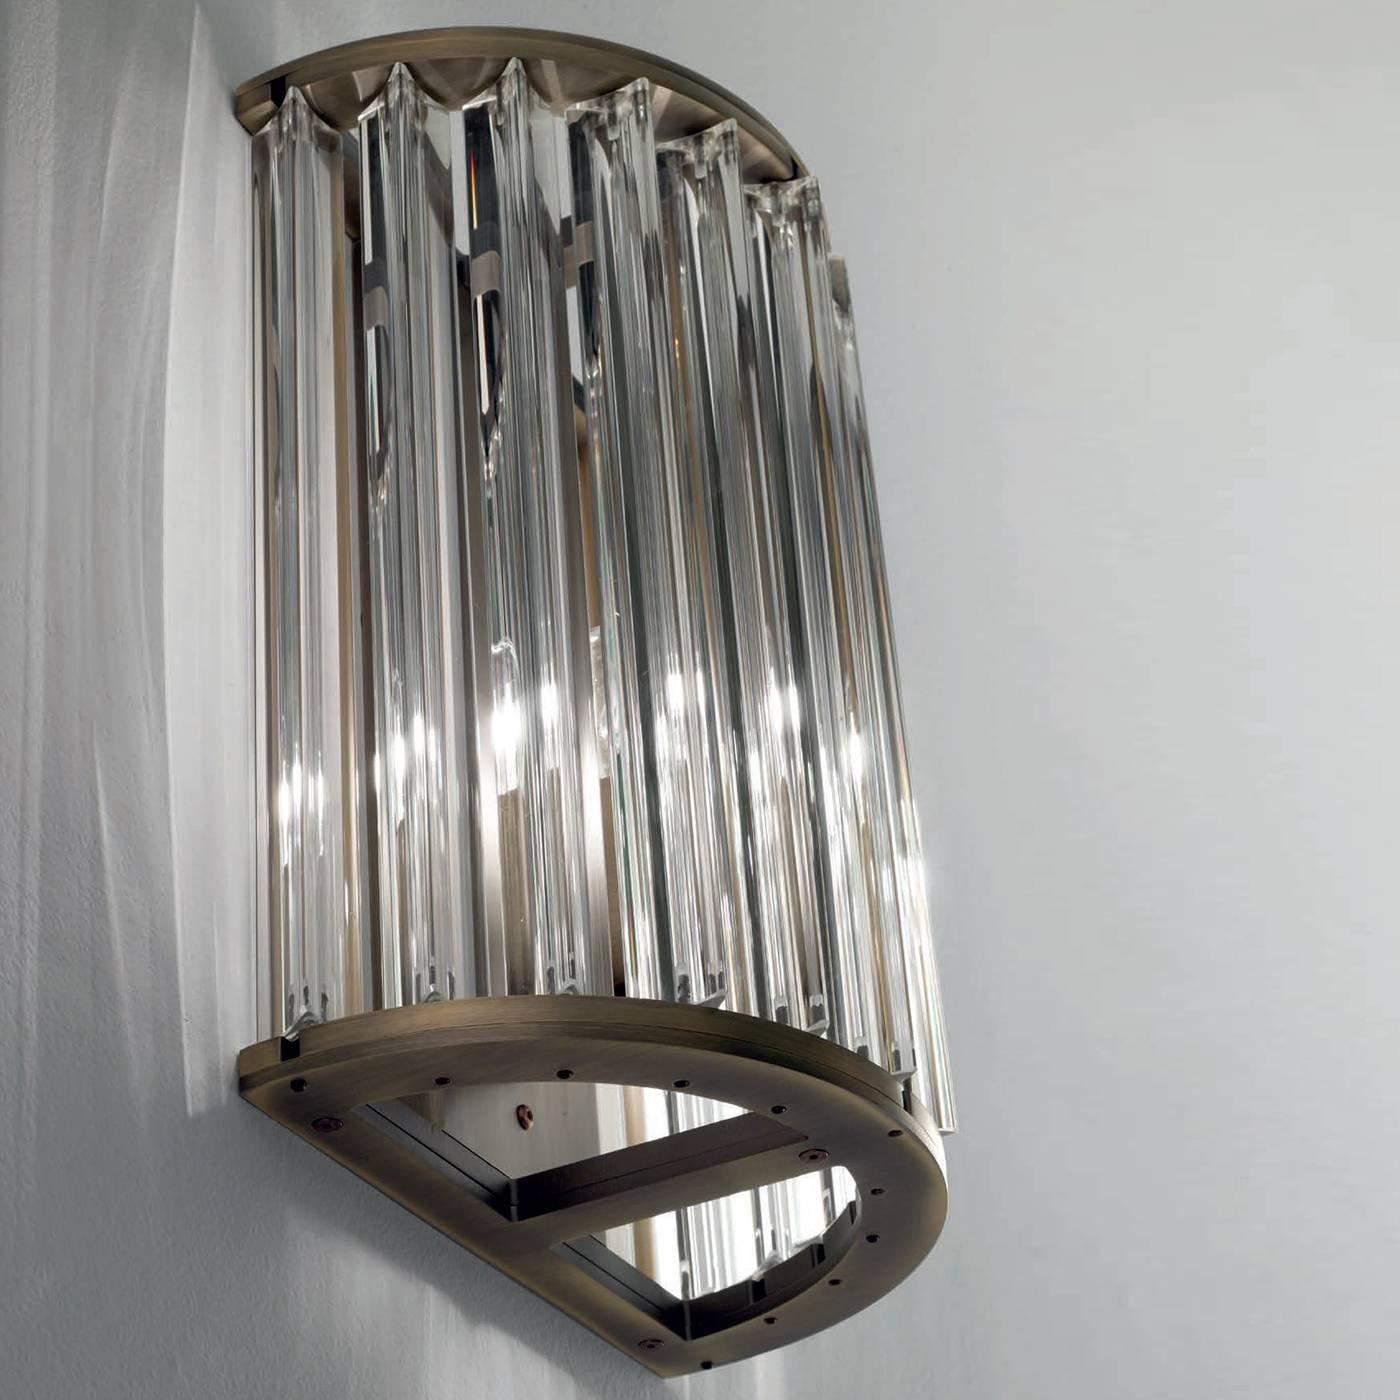 This exquisite sconce exudes art deco elegance and old-fashion sophistication, thanks to its triangle-section rods of crystal placed in a semi-circle and brilliantly diffusing the light for a timeless effect. Particularly suitable for a classic